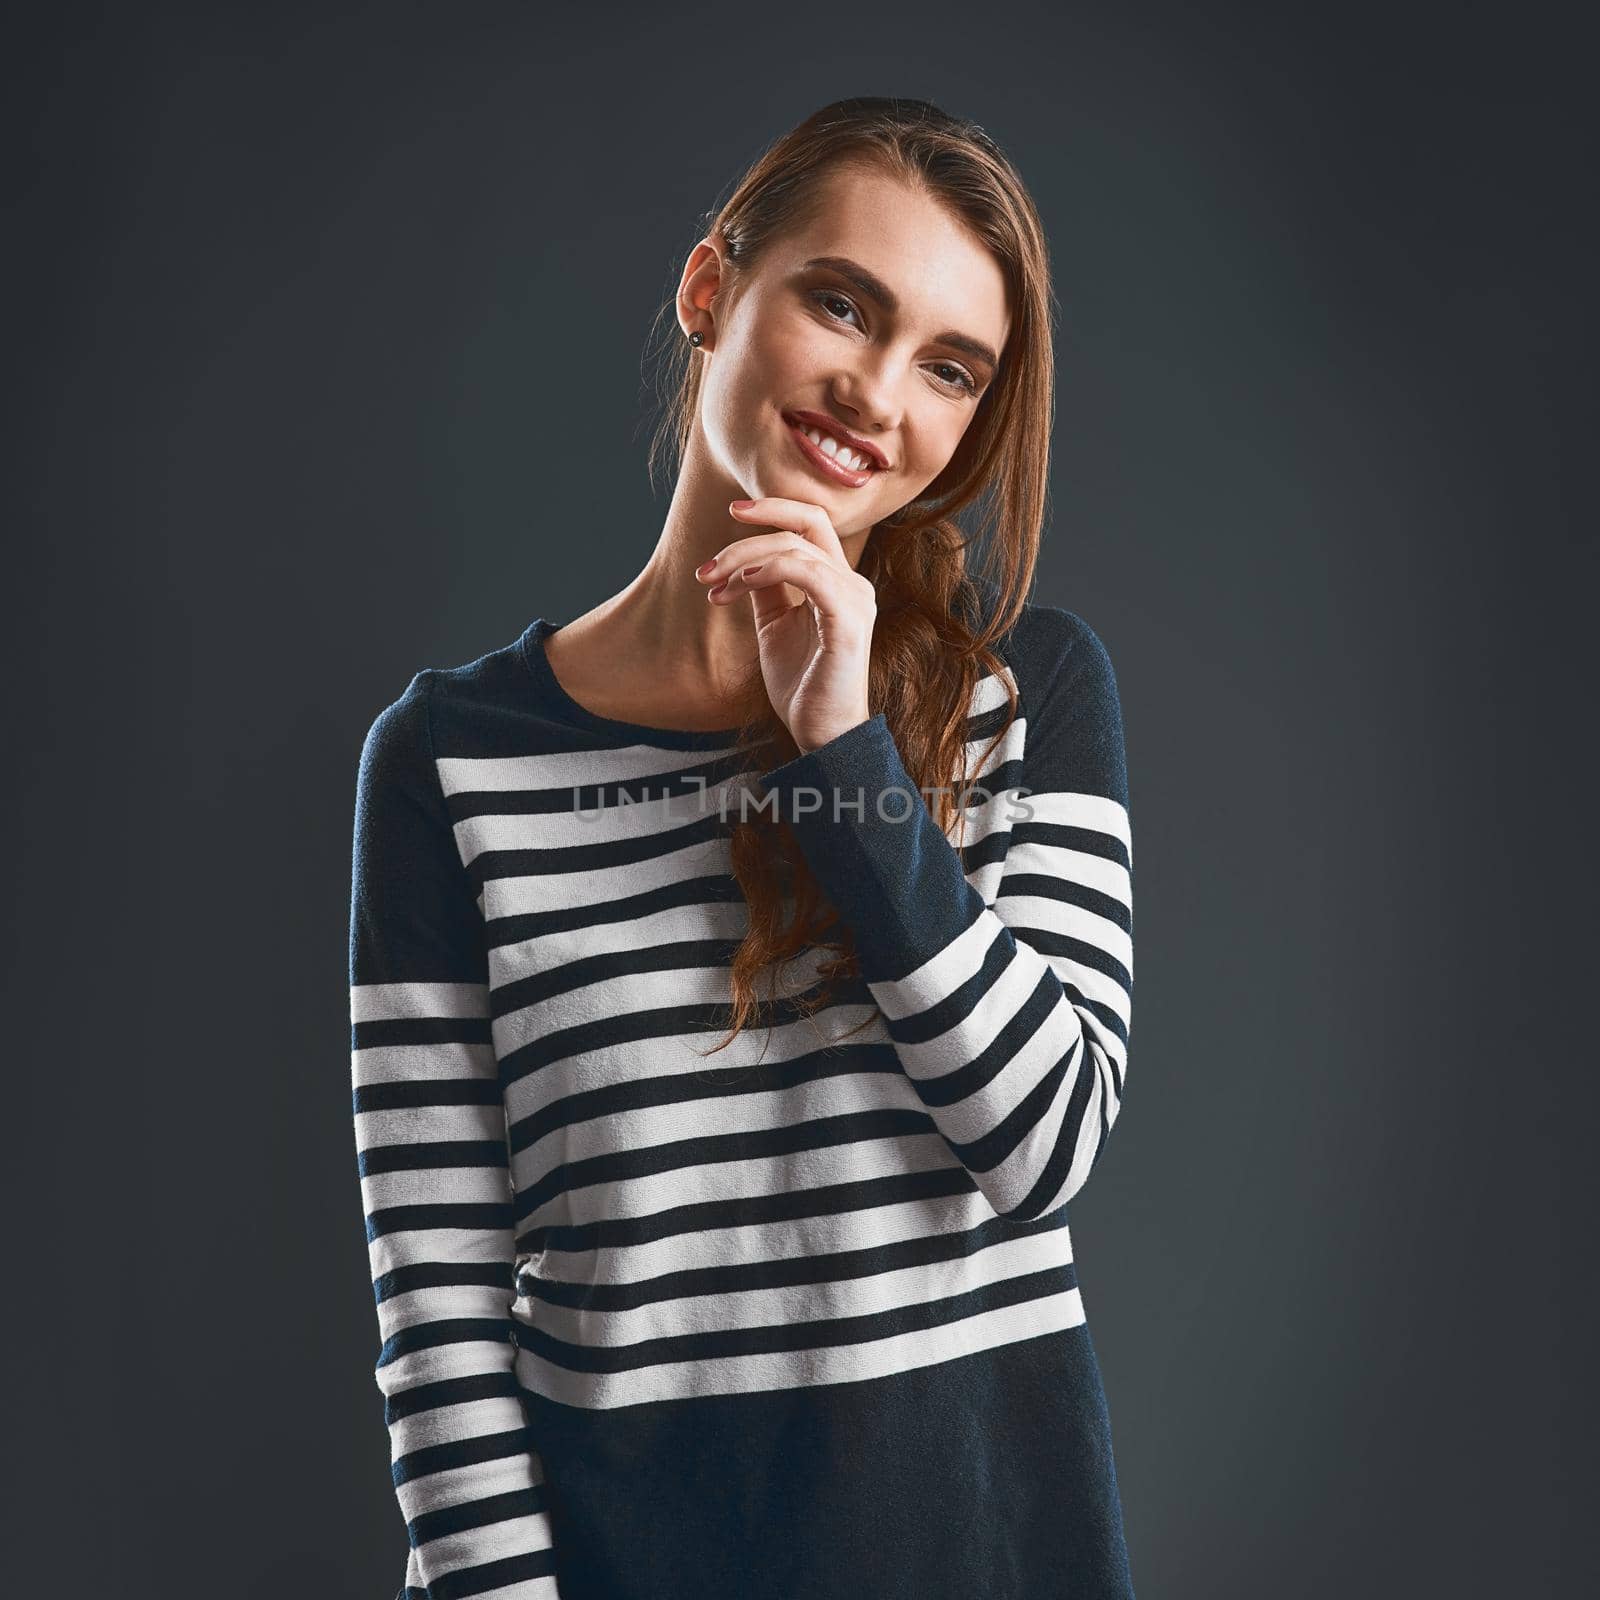 Brightening up the dark. Studio portrait of a cheerful young woman holding her chin while standing against a dark background. by YuriArcurs